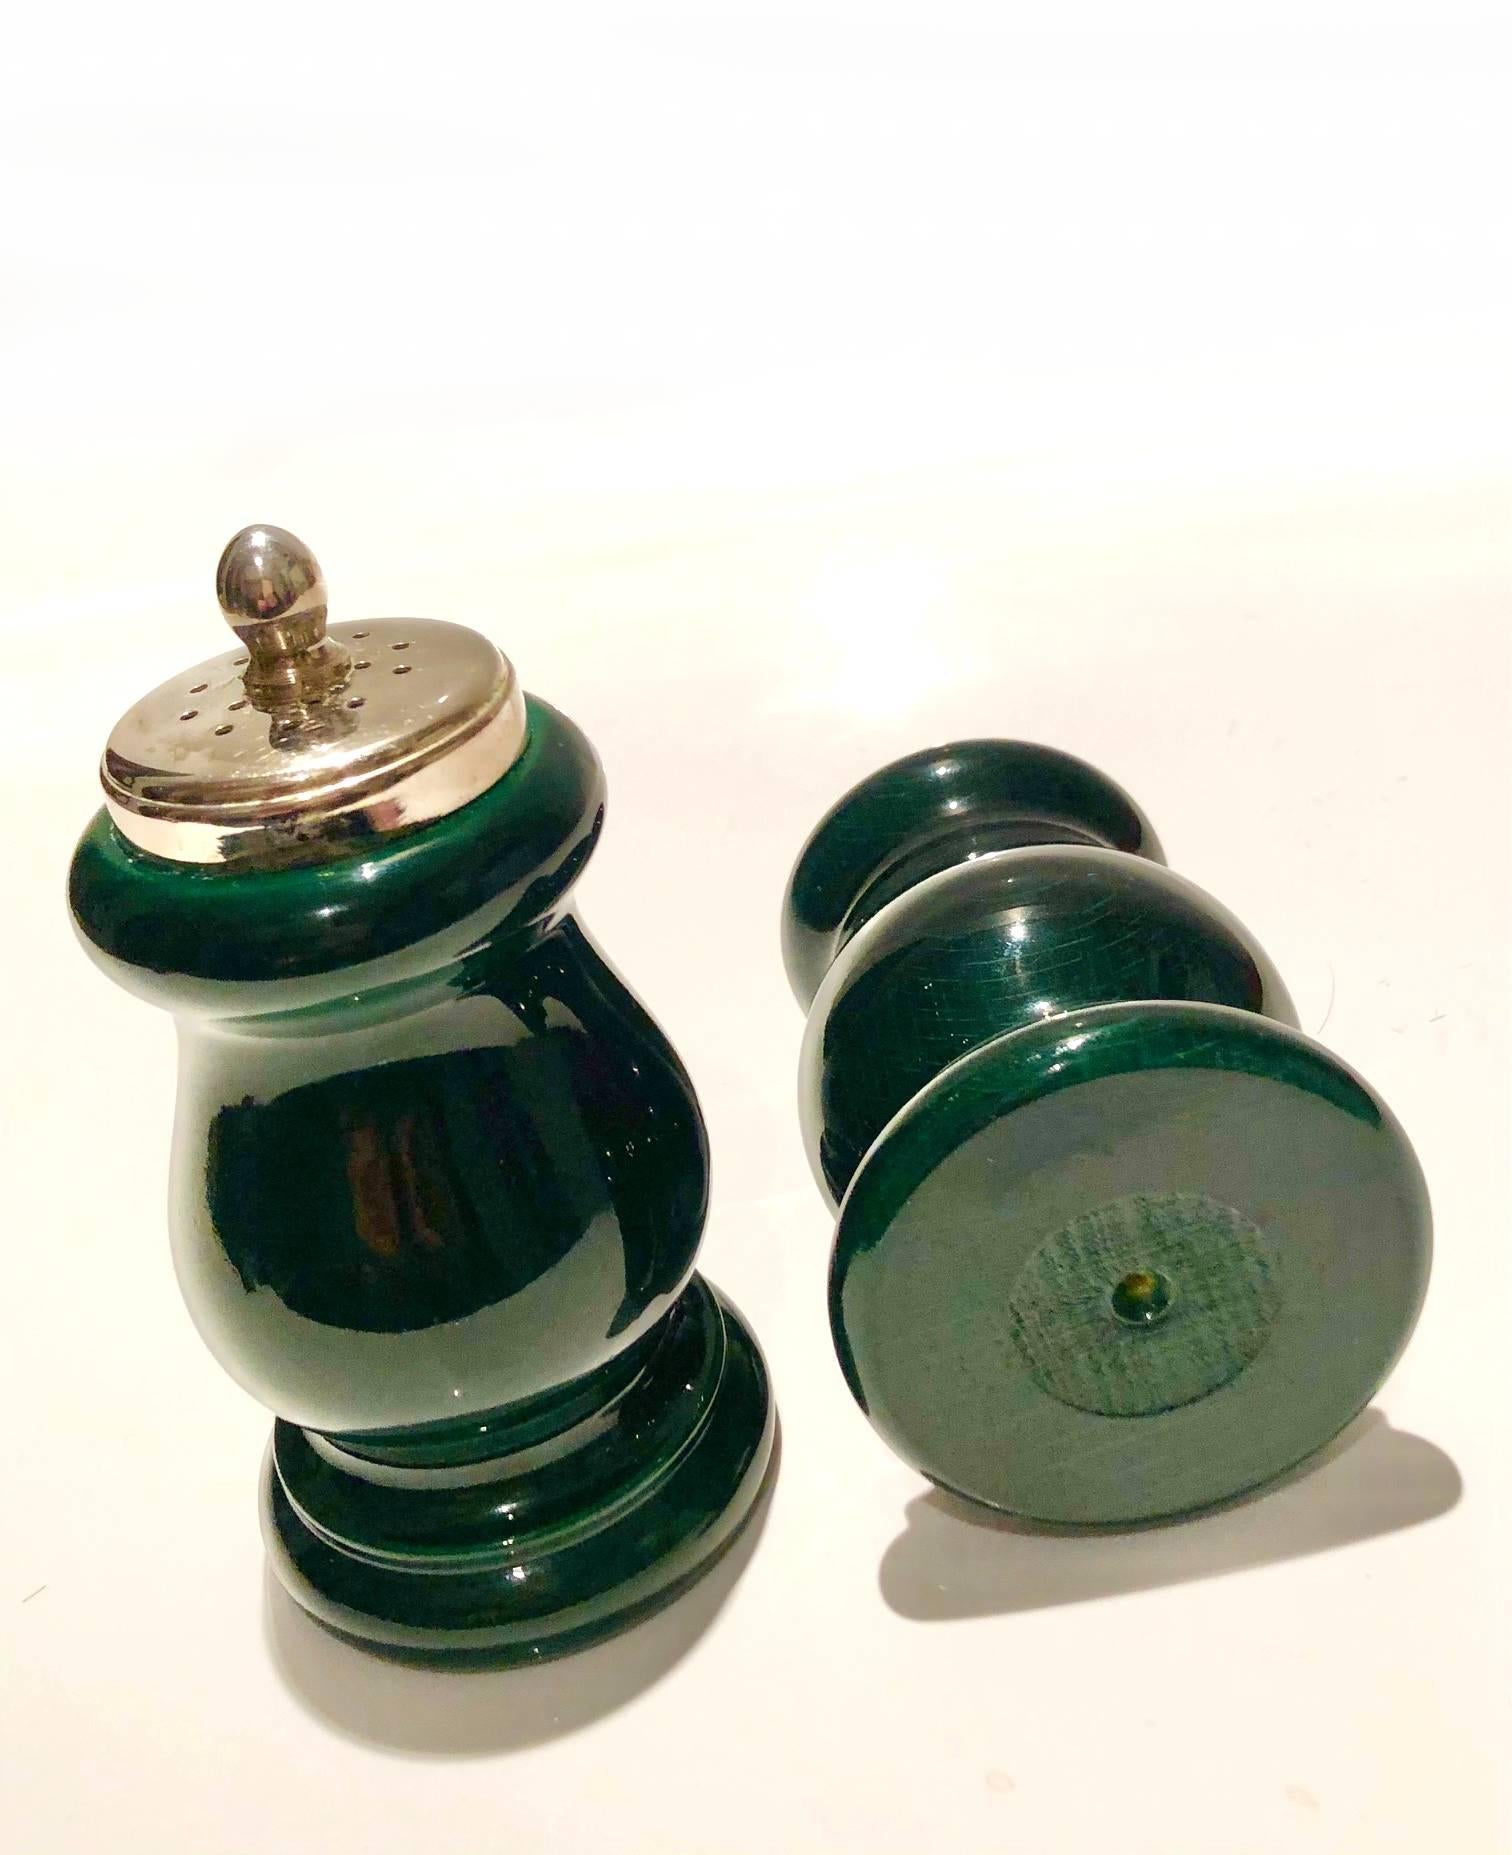 Black 1980s Gucci Silver Tone and Green Lacquered Finish Wood Salt Shakers